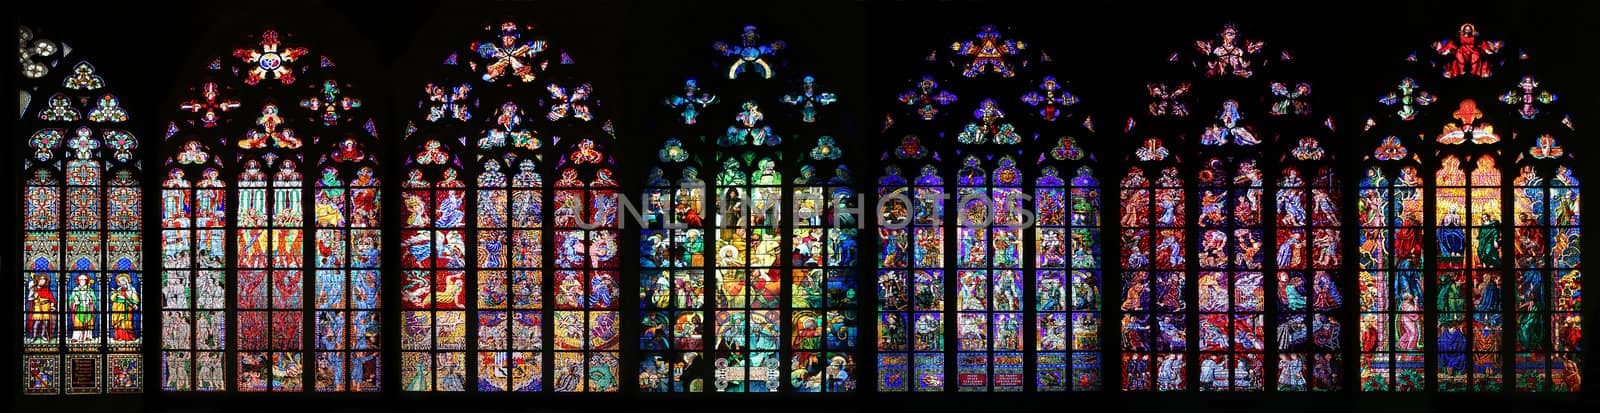 St Vitus Stained Glass Window collection by LoonChild